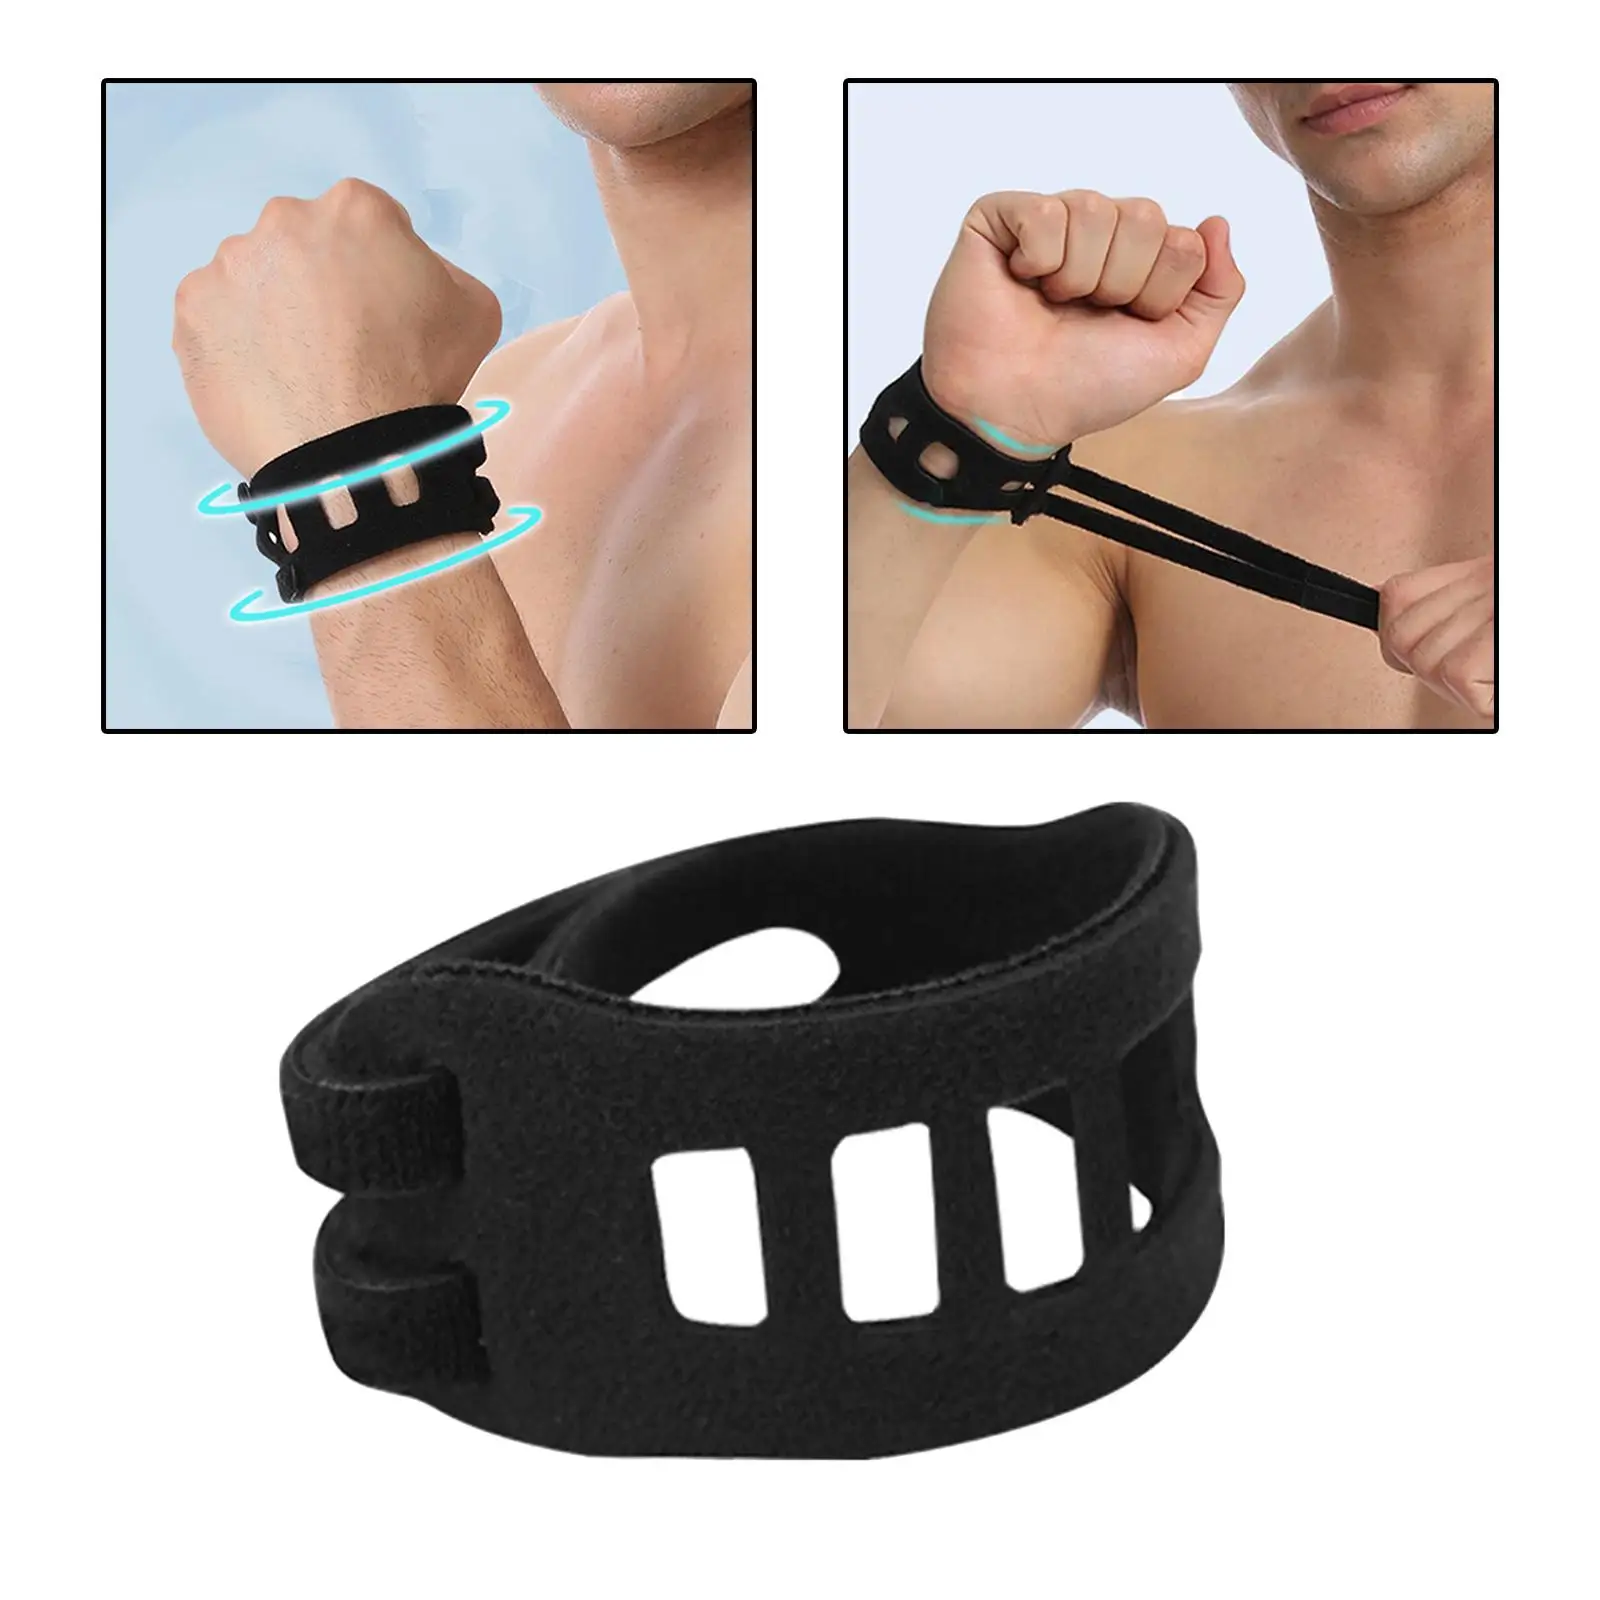 Tfcc Wrist Brace Thin Breathable Sprain Protection Portable Support for Working Out Basketball Fitness Women Men Carpal Tunnel